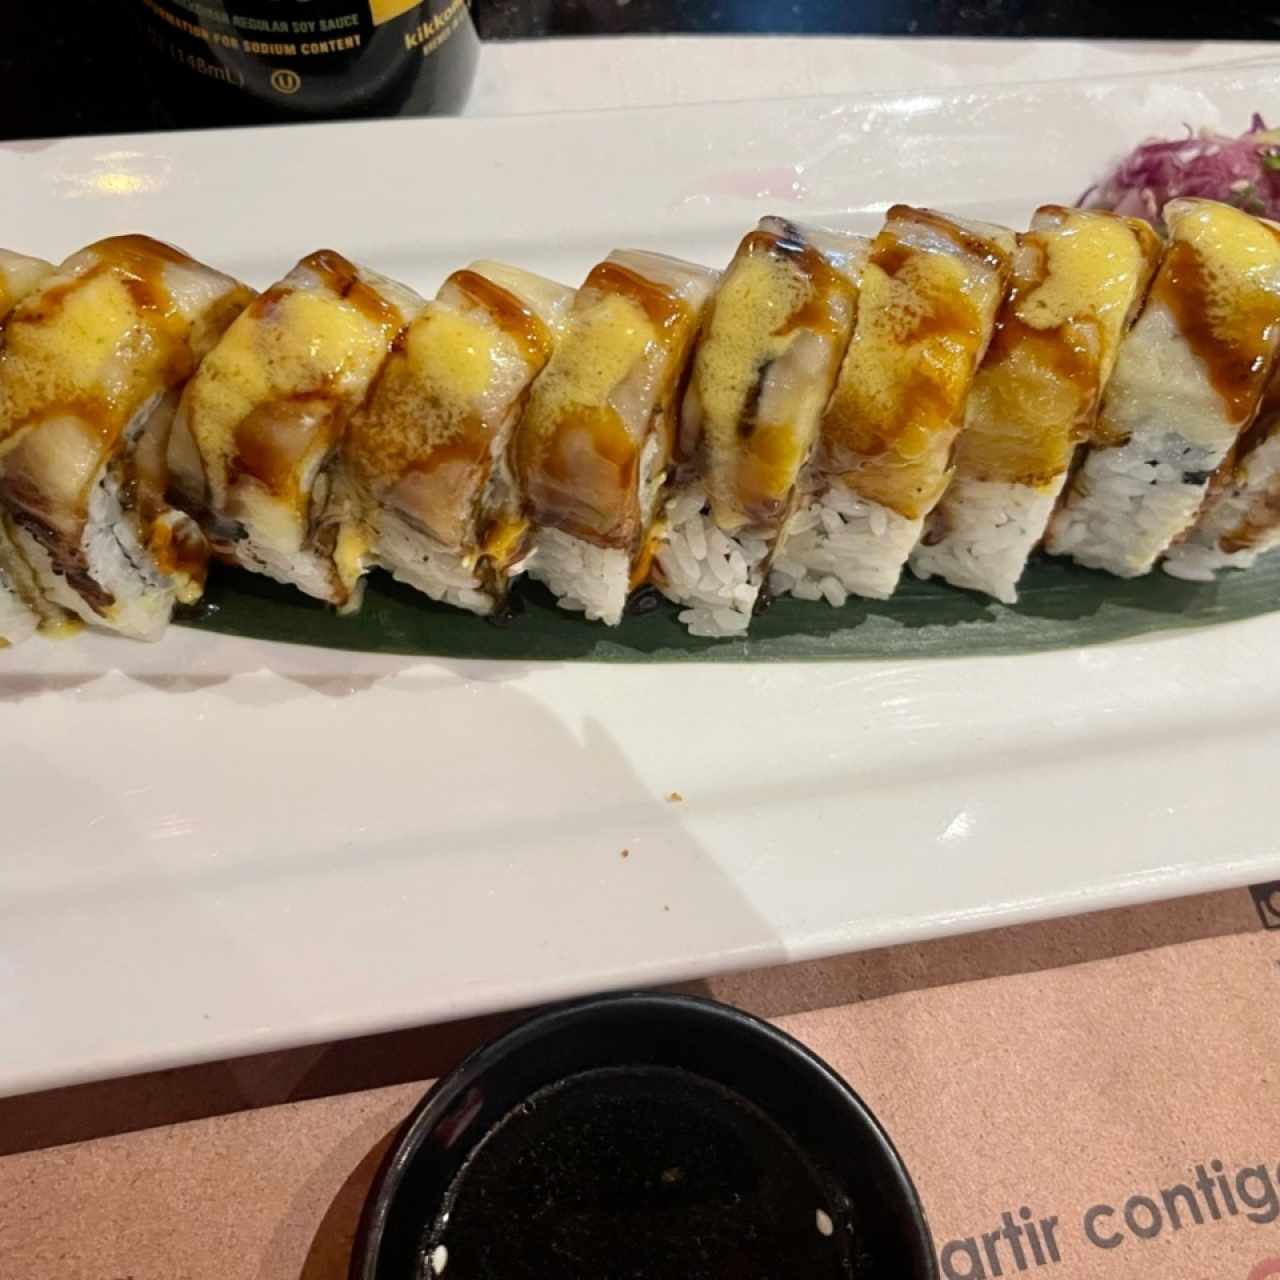 Tropical roll